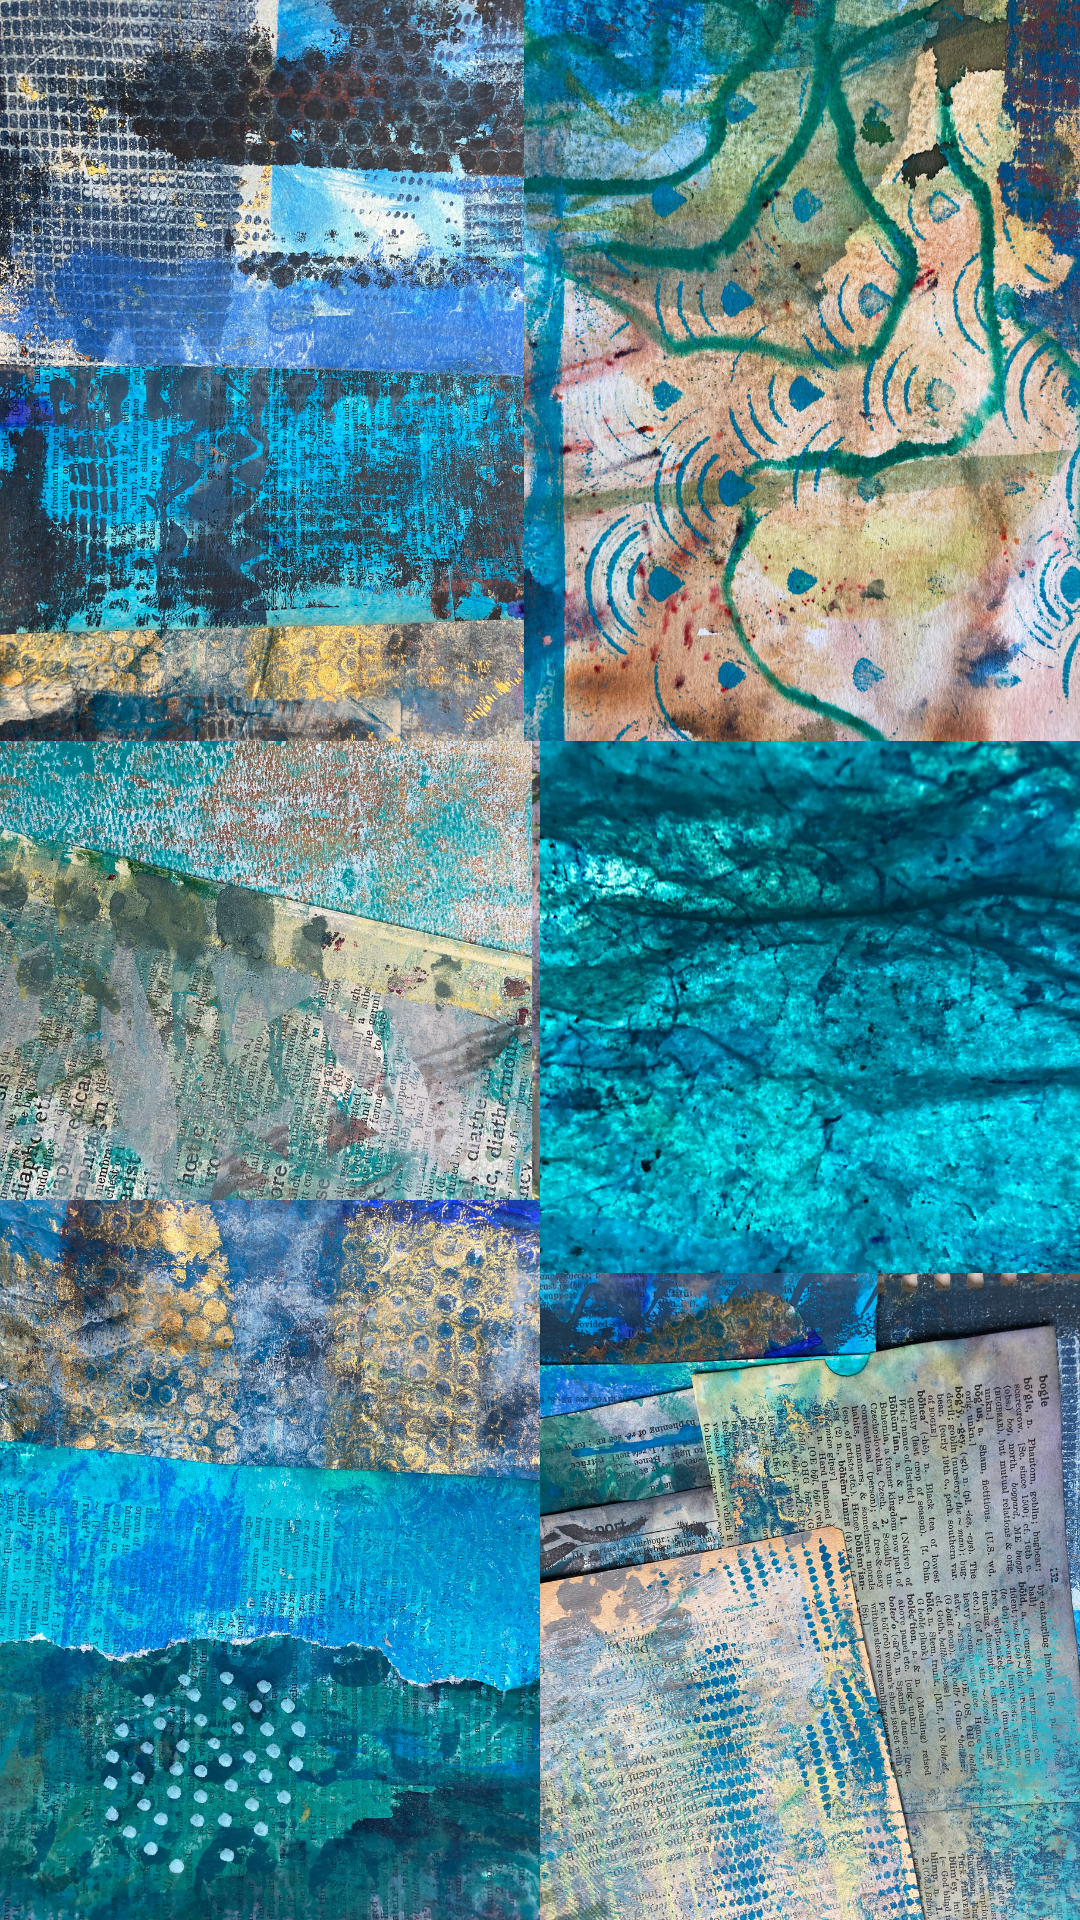 Painted Paper Bundles for Mixed Media Collage  | "Beside the Seaside"